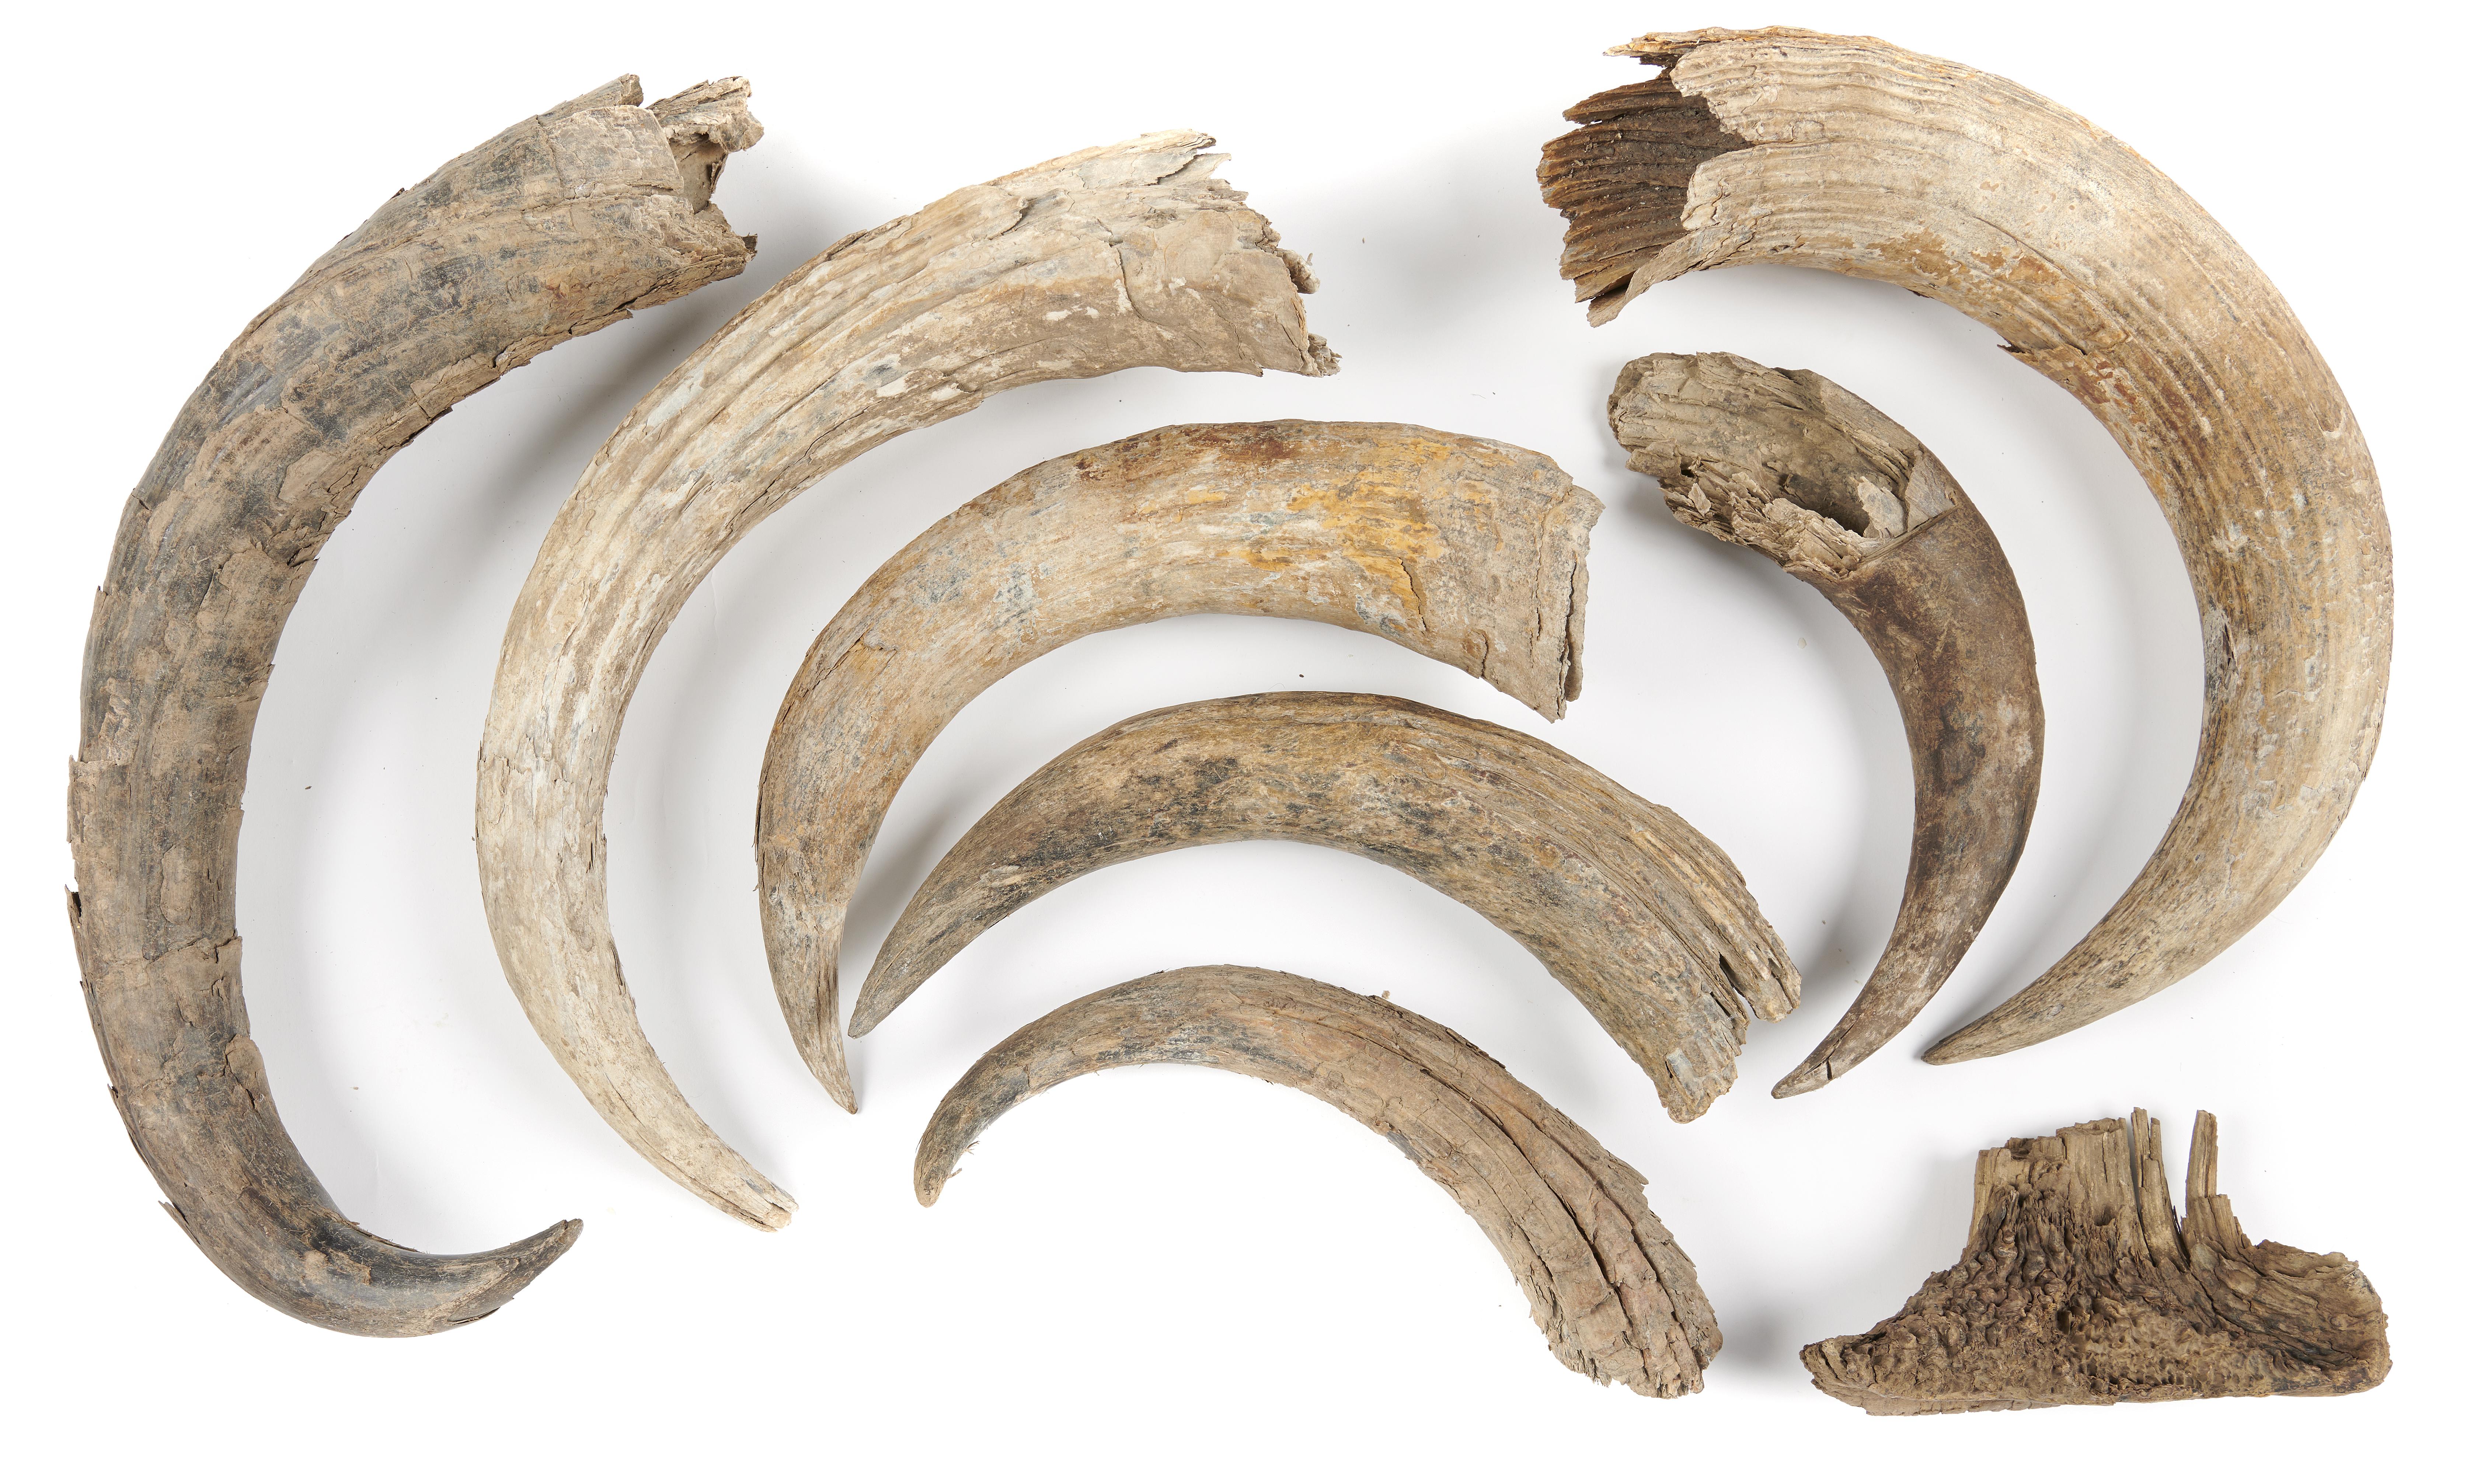 A collection of Steppe bison horns Pleistocene, Yakutia, Siberia together with a collection of reproduction woolly rhinoceros horns